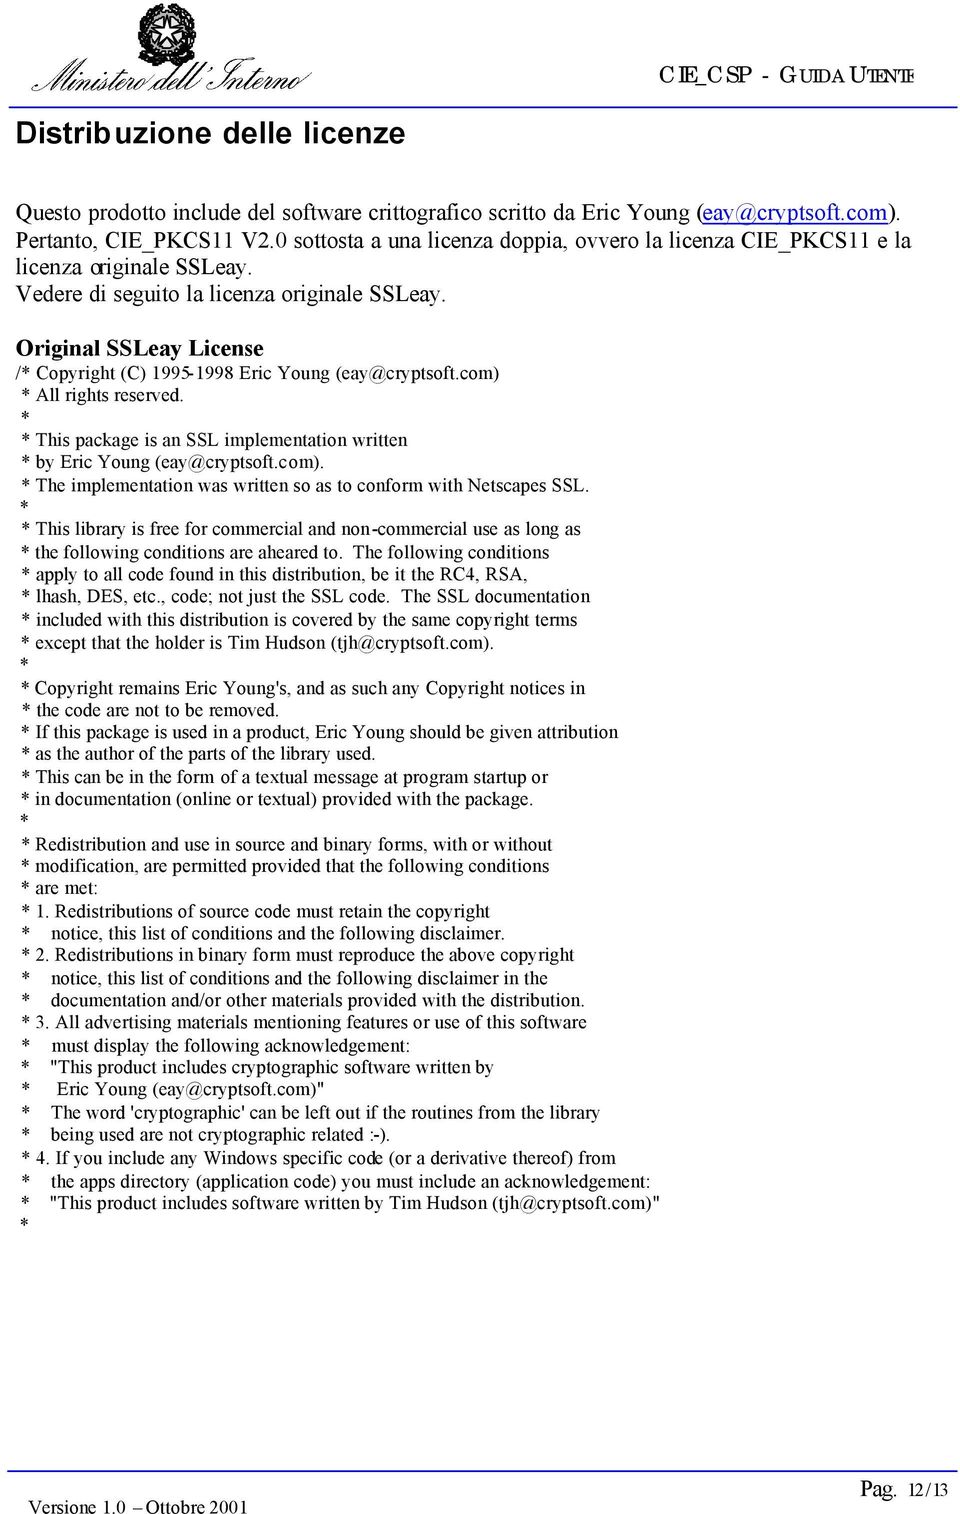 Original SSLeay License /* Copyright (C) 1995-1998 Eric Young (eay@cryptsoft.com) * All rights reserved. * * This package is an SSL implementation written * by Eric Young (eay@cryptsoft.com). * The implementation was written so as to conform with Netscapes SSL.